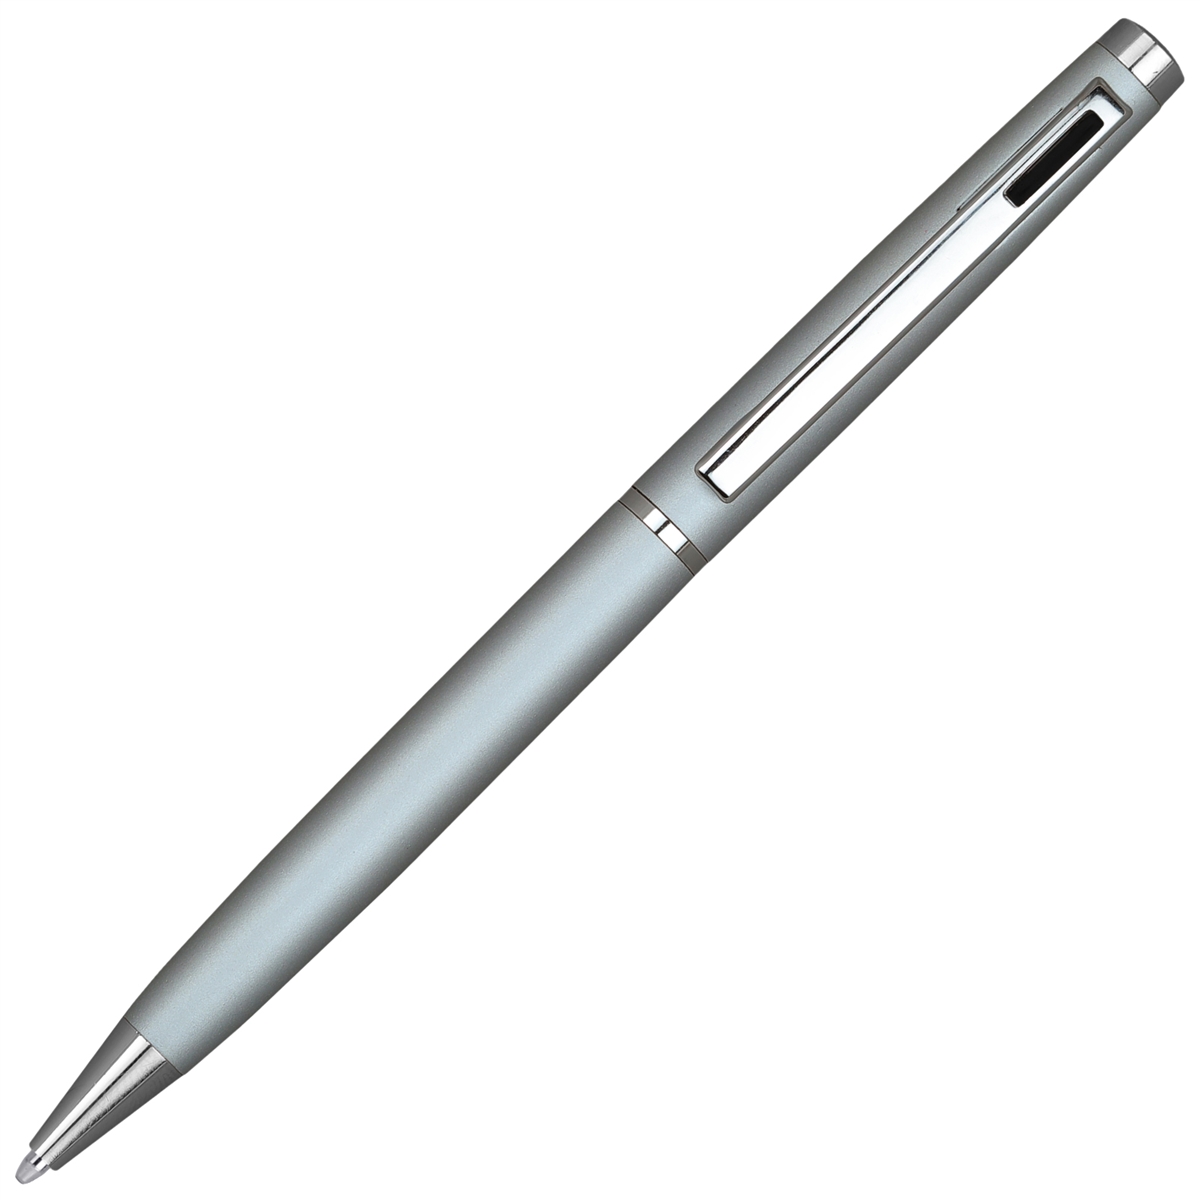 4G Ball Pen – Silver with Black Accents by Lanier Pens